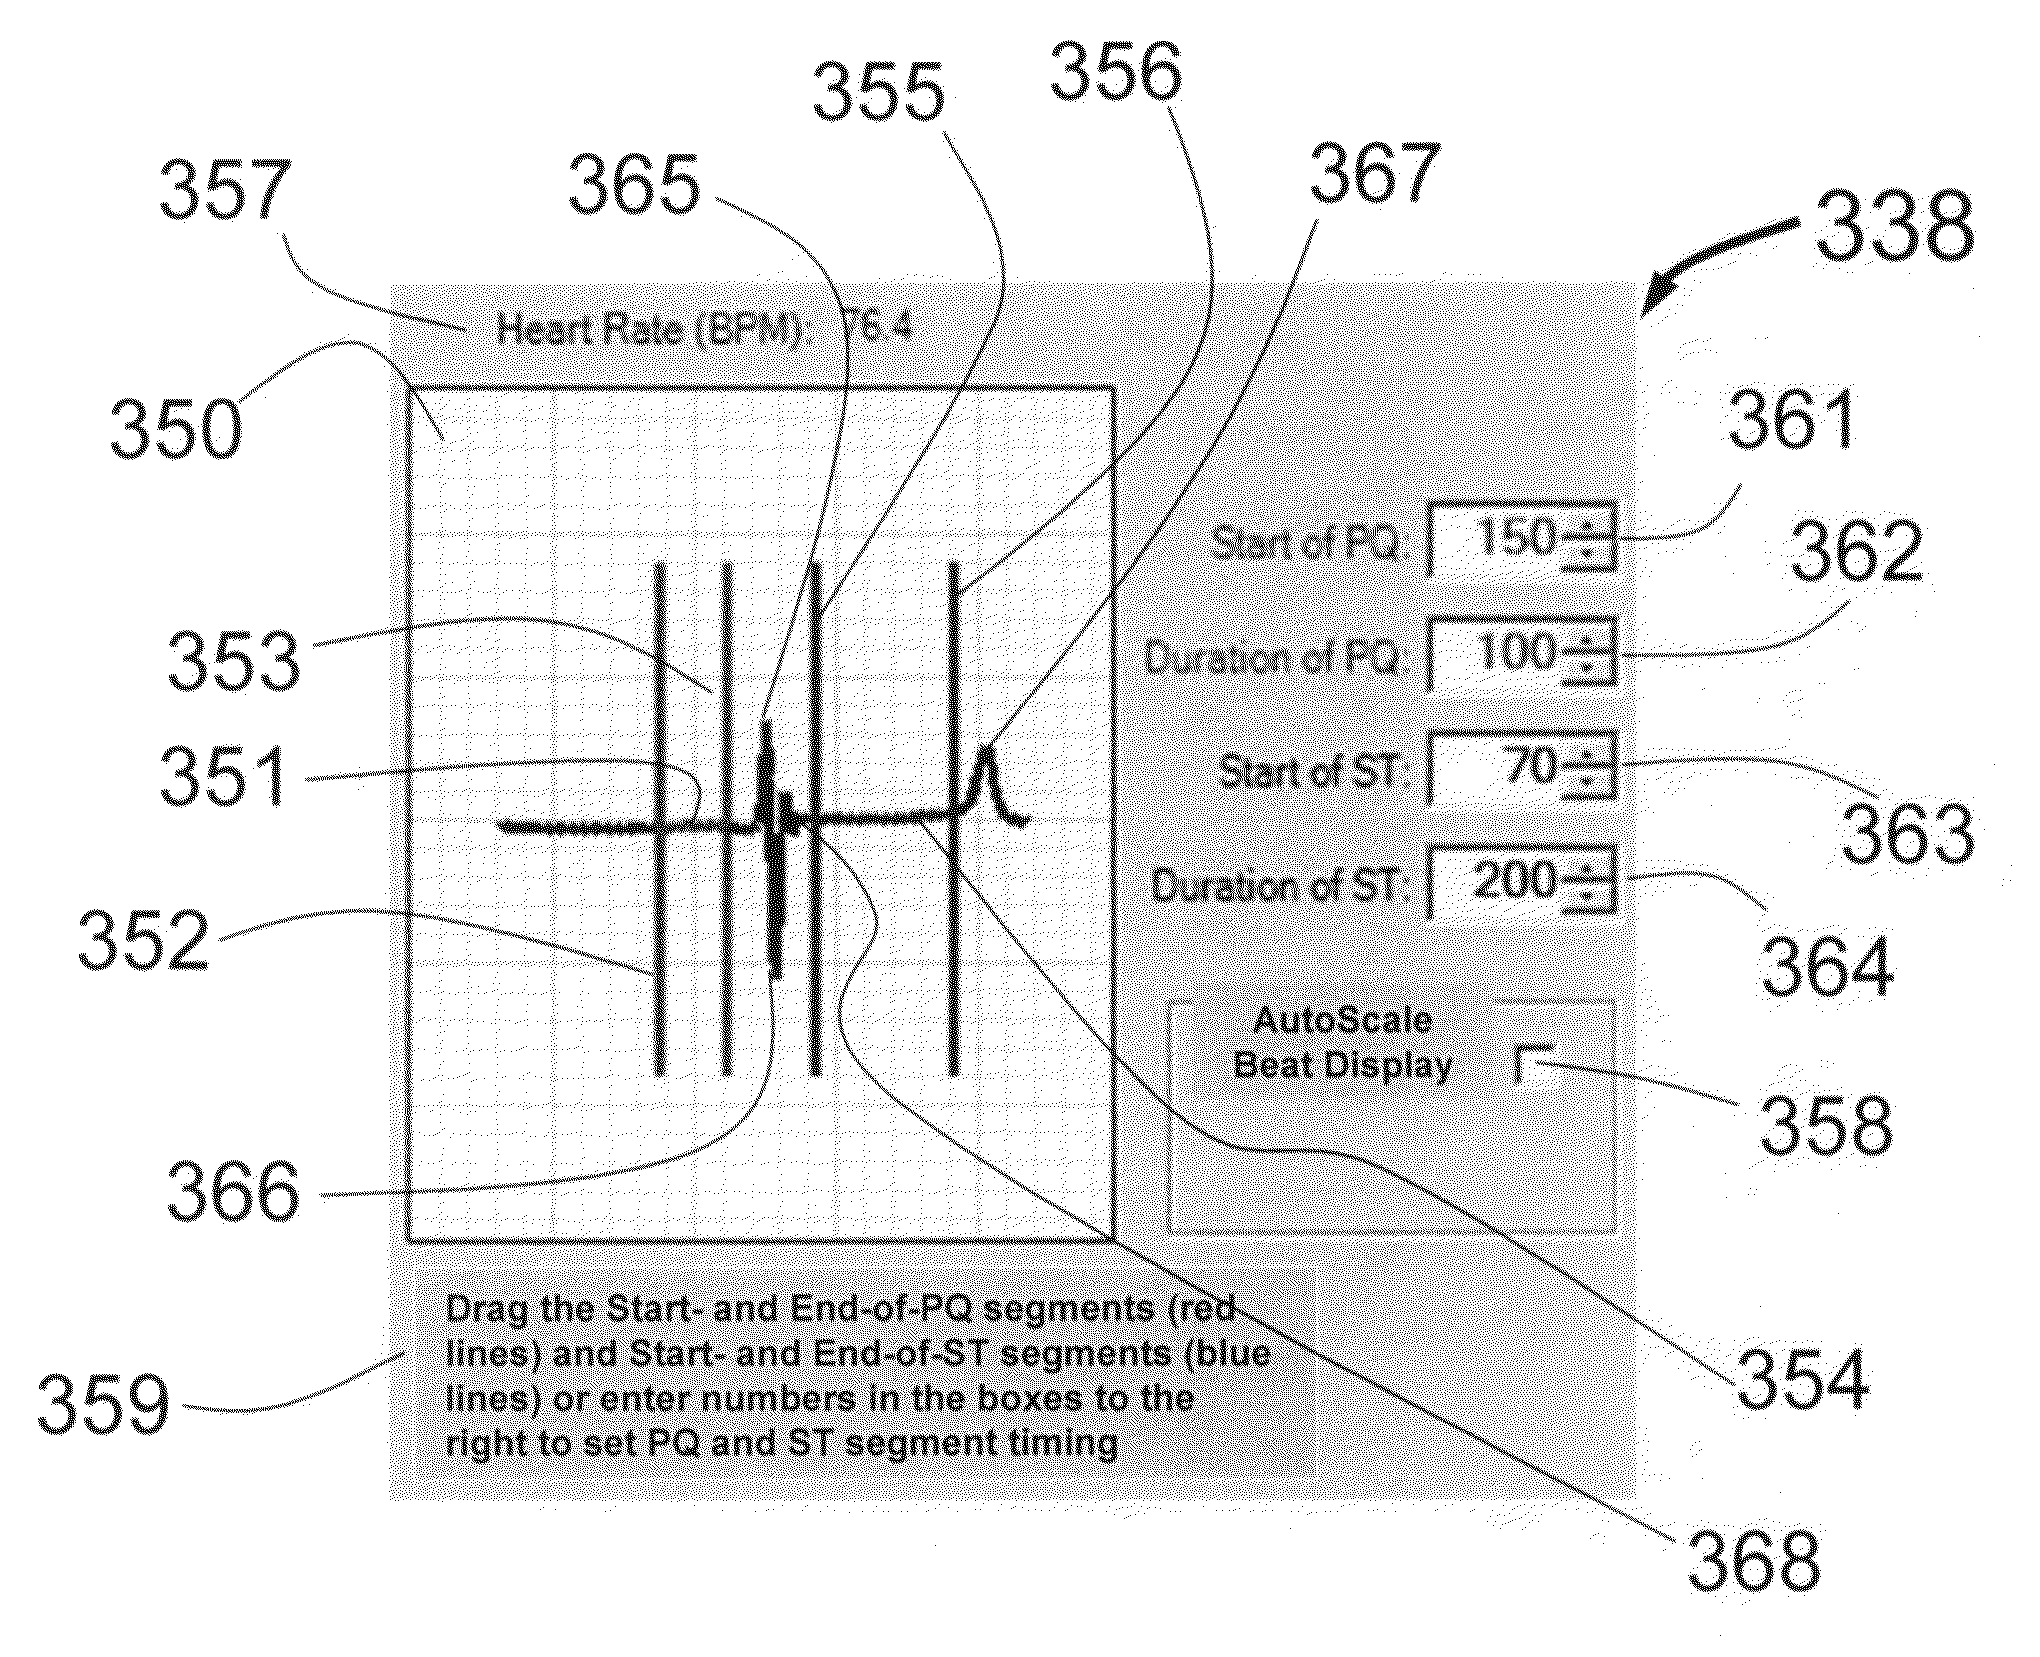 Physician's programmer for implantable devices having cardiac diagnostic and patient alerting capabilities